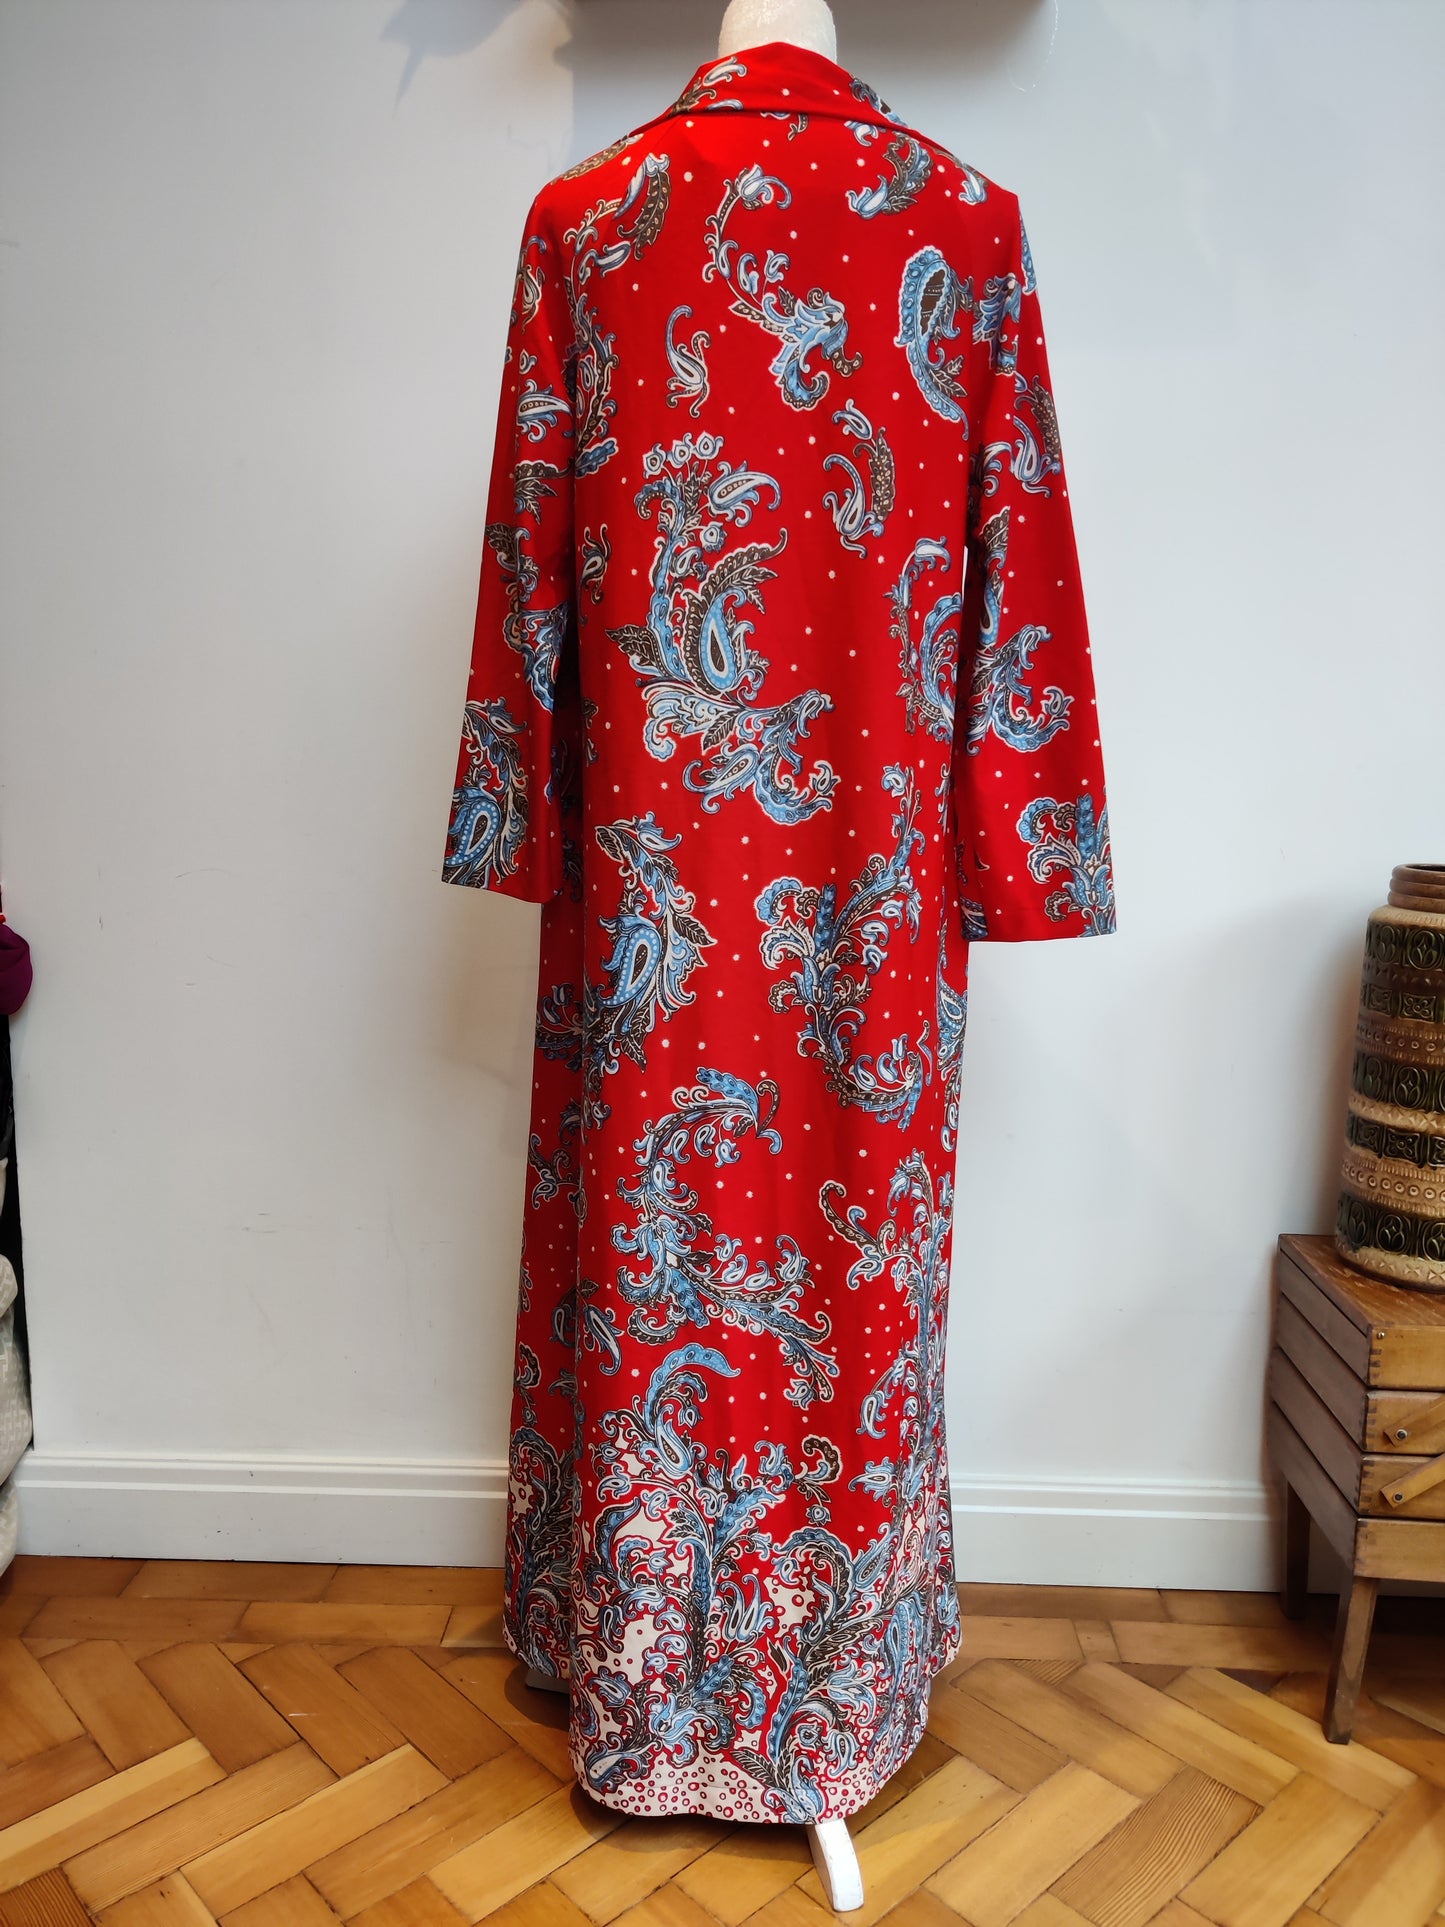 Absolutely stunning vintage housecoat in red paisley print